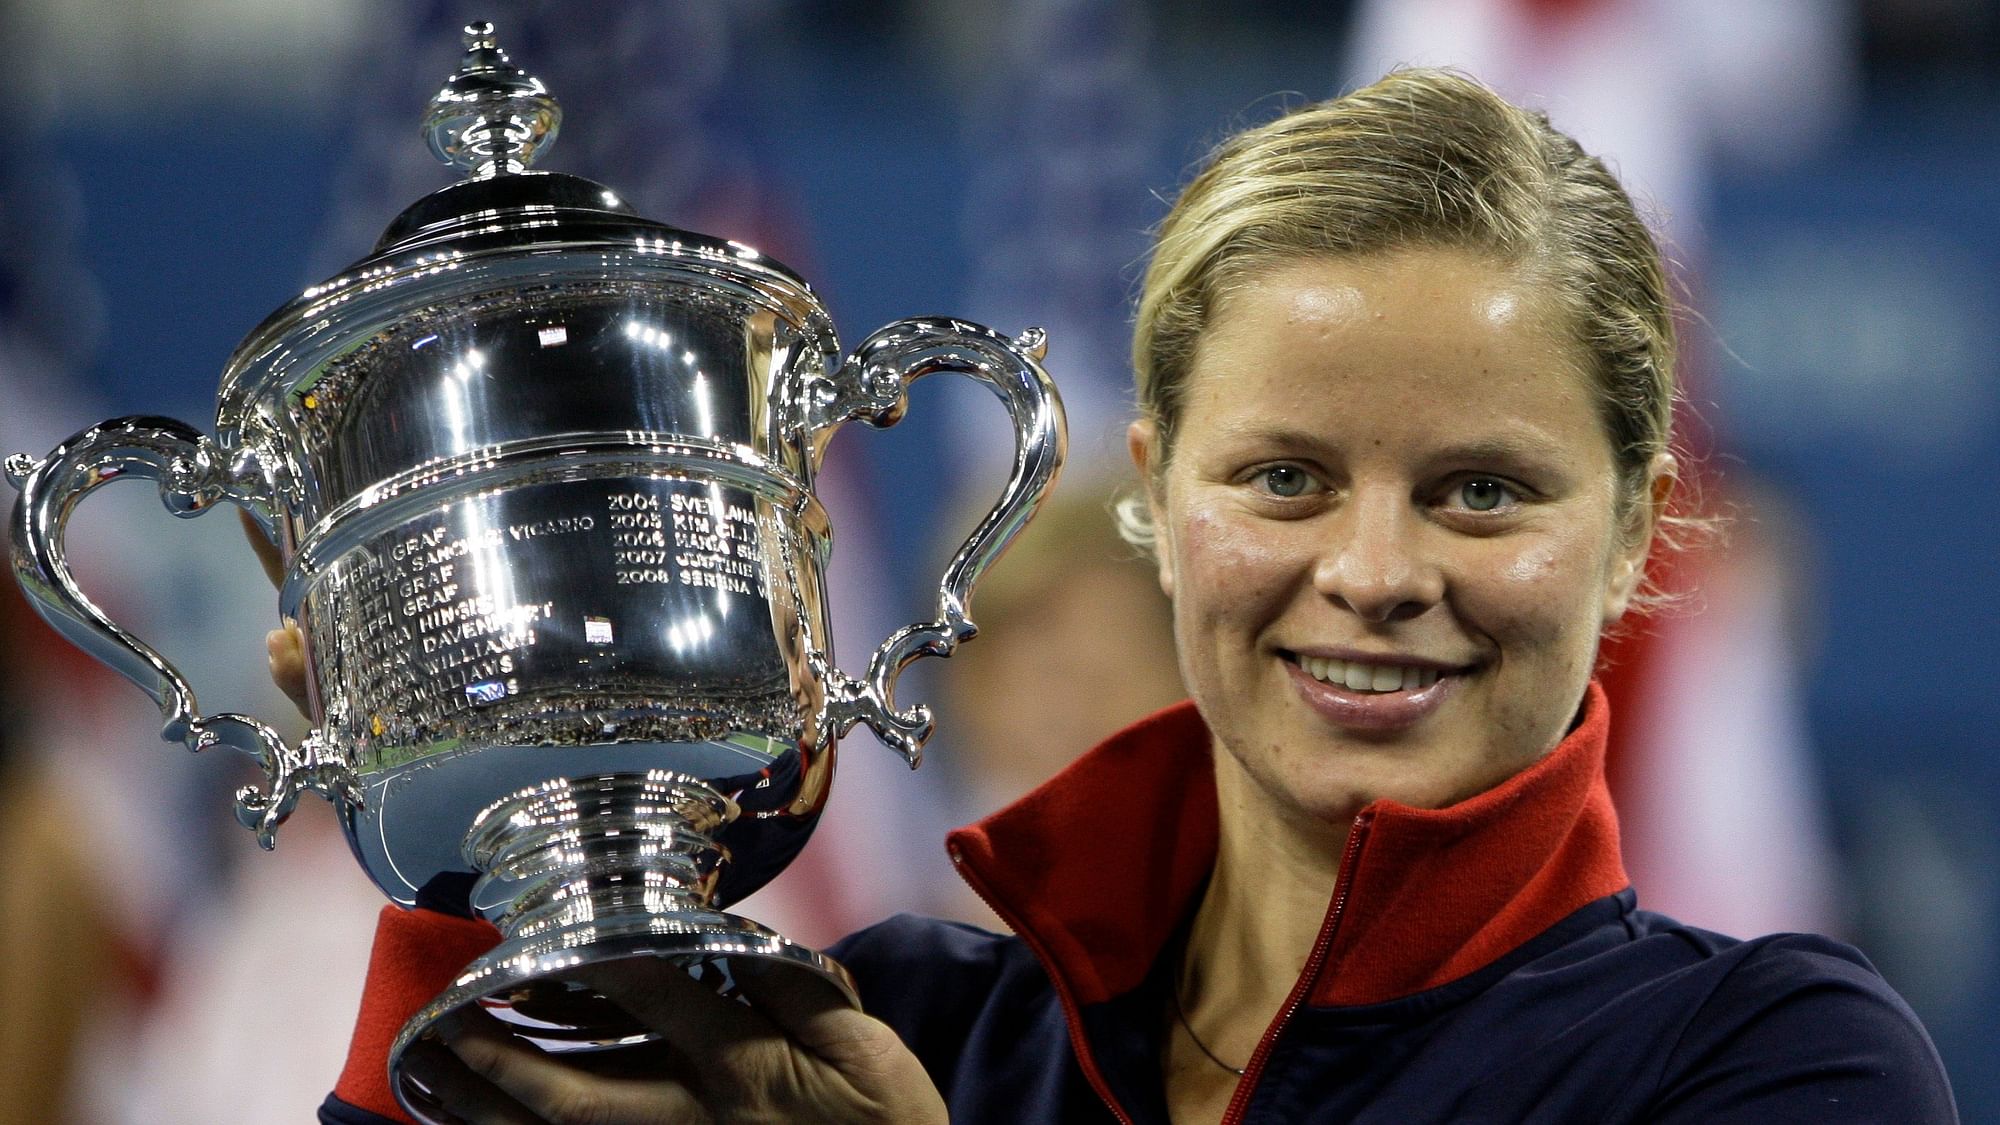 Kim Clijsters is expected to make an appearance at the Mexican Open.